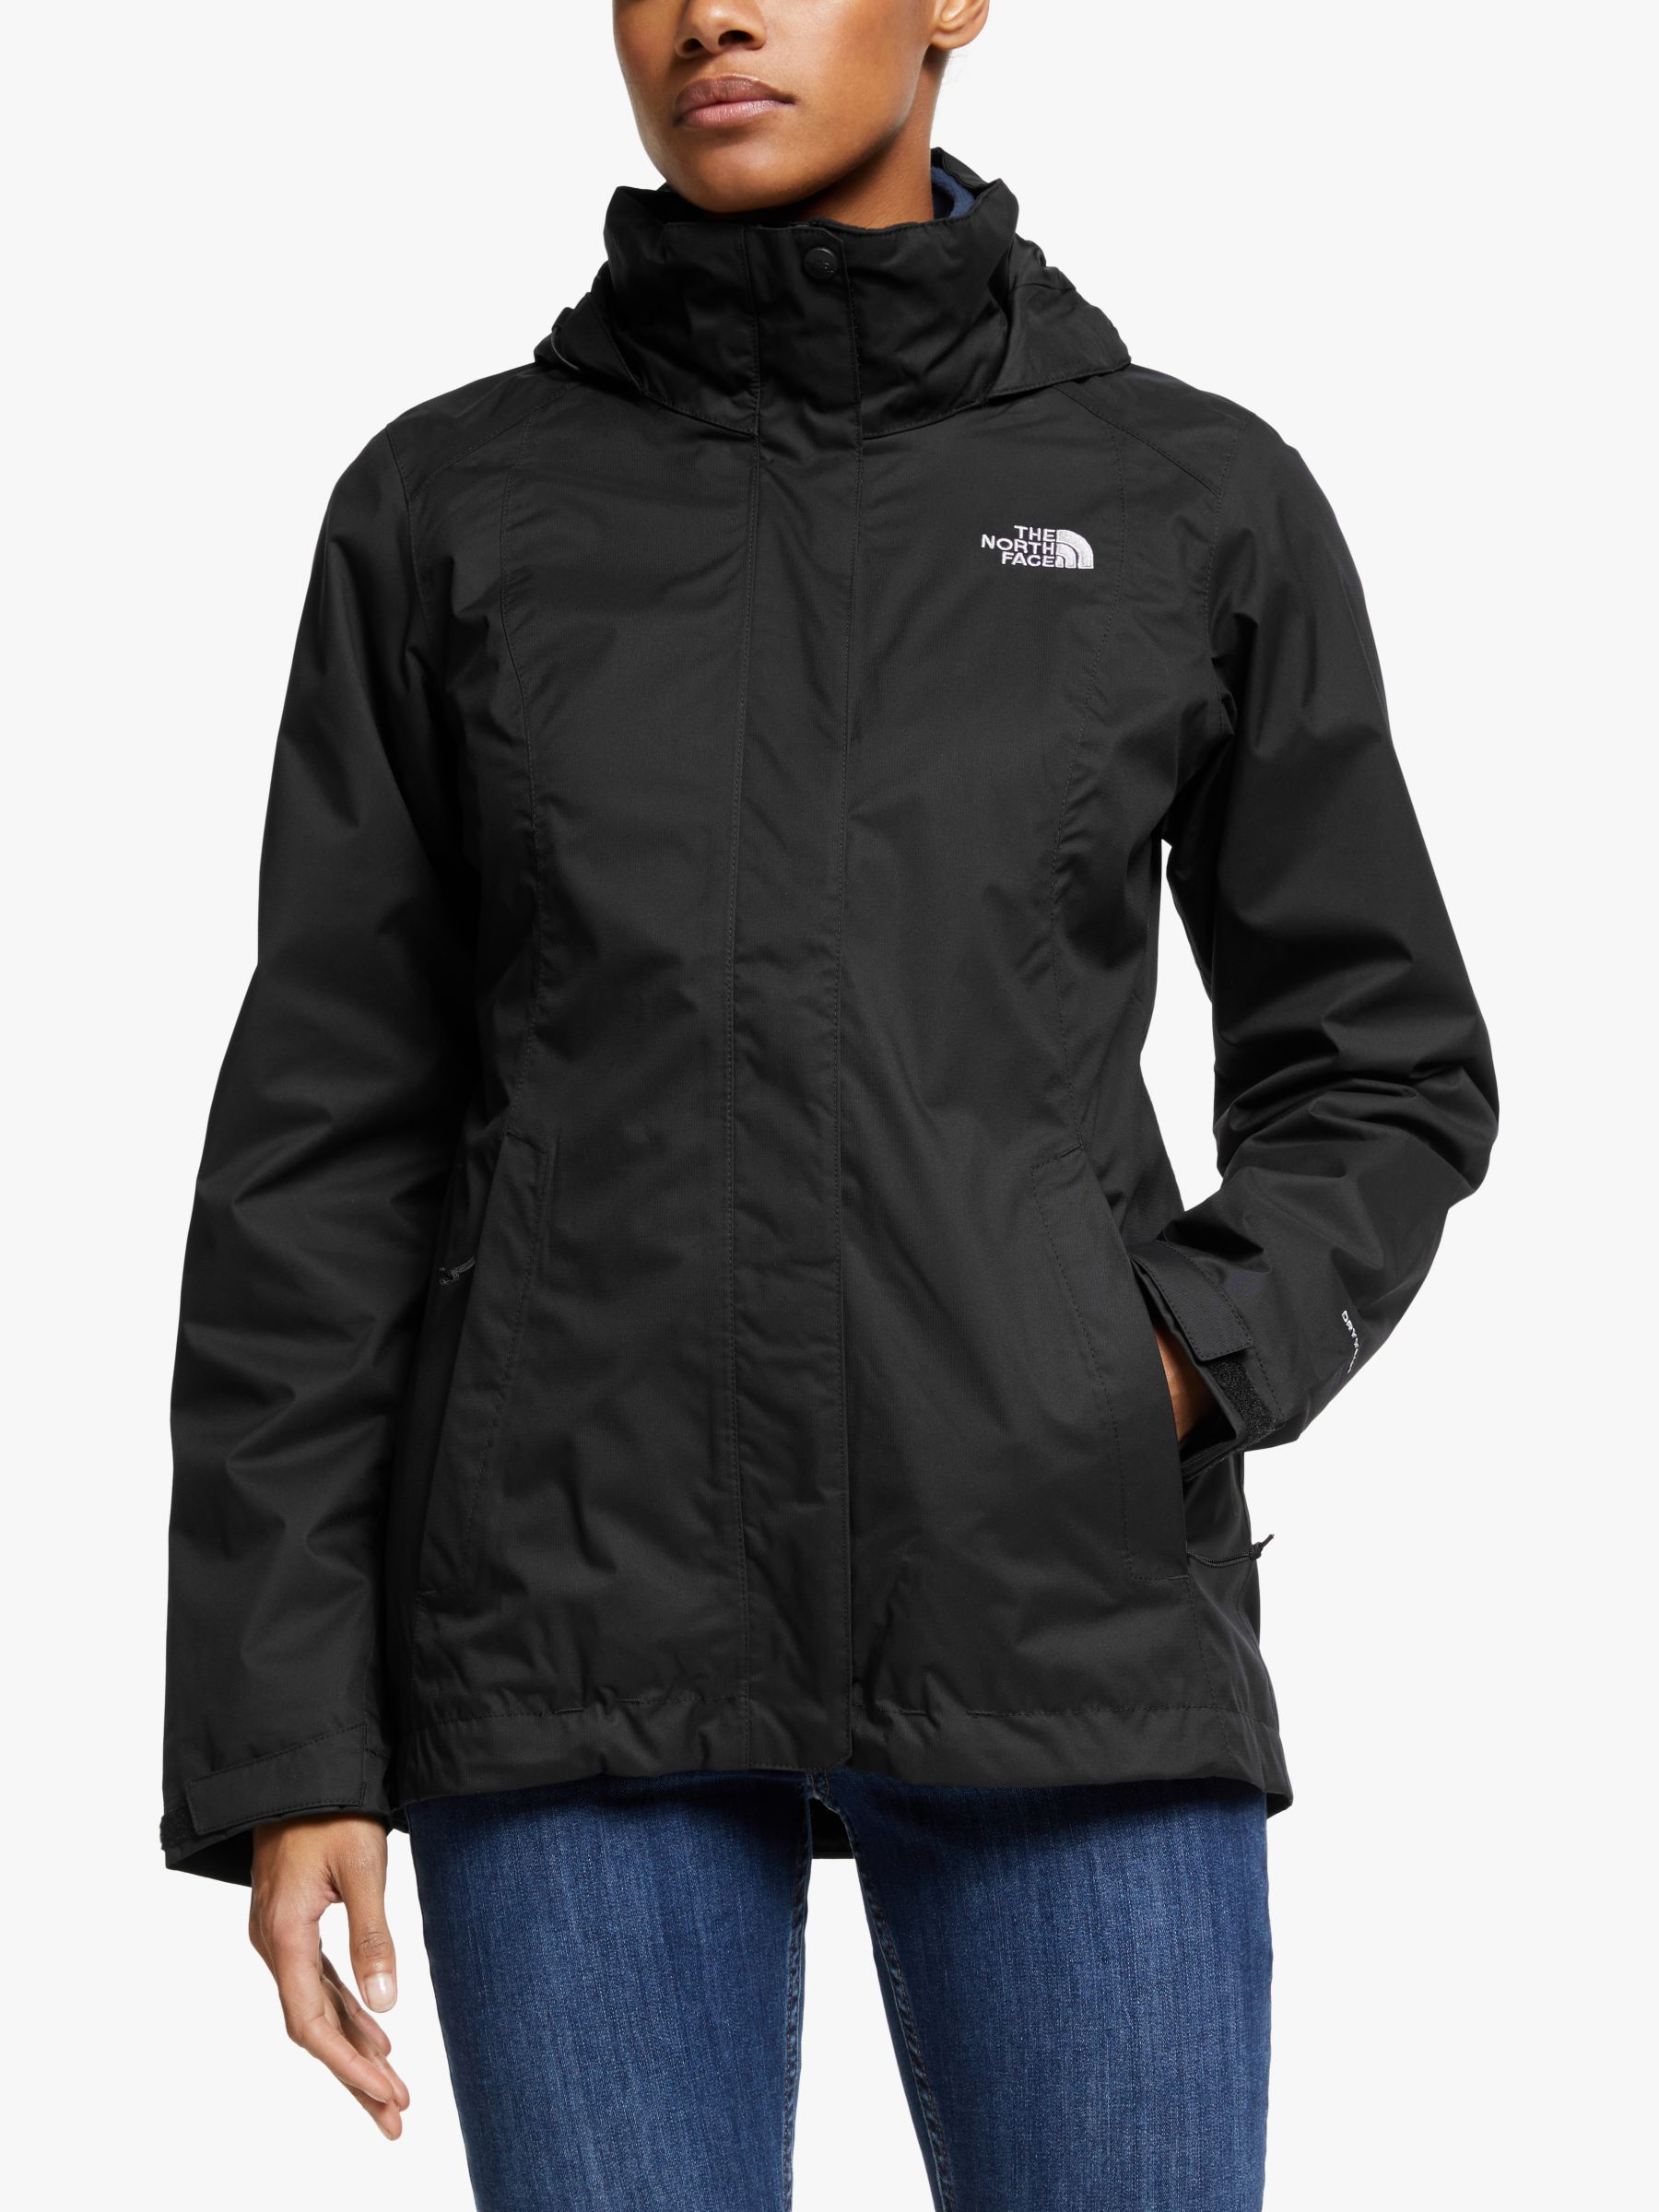 the north face jacket womens